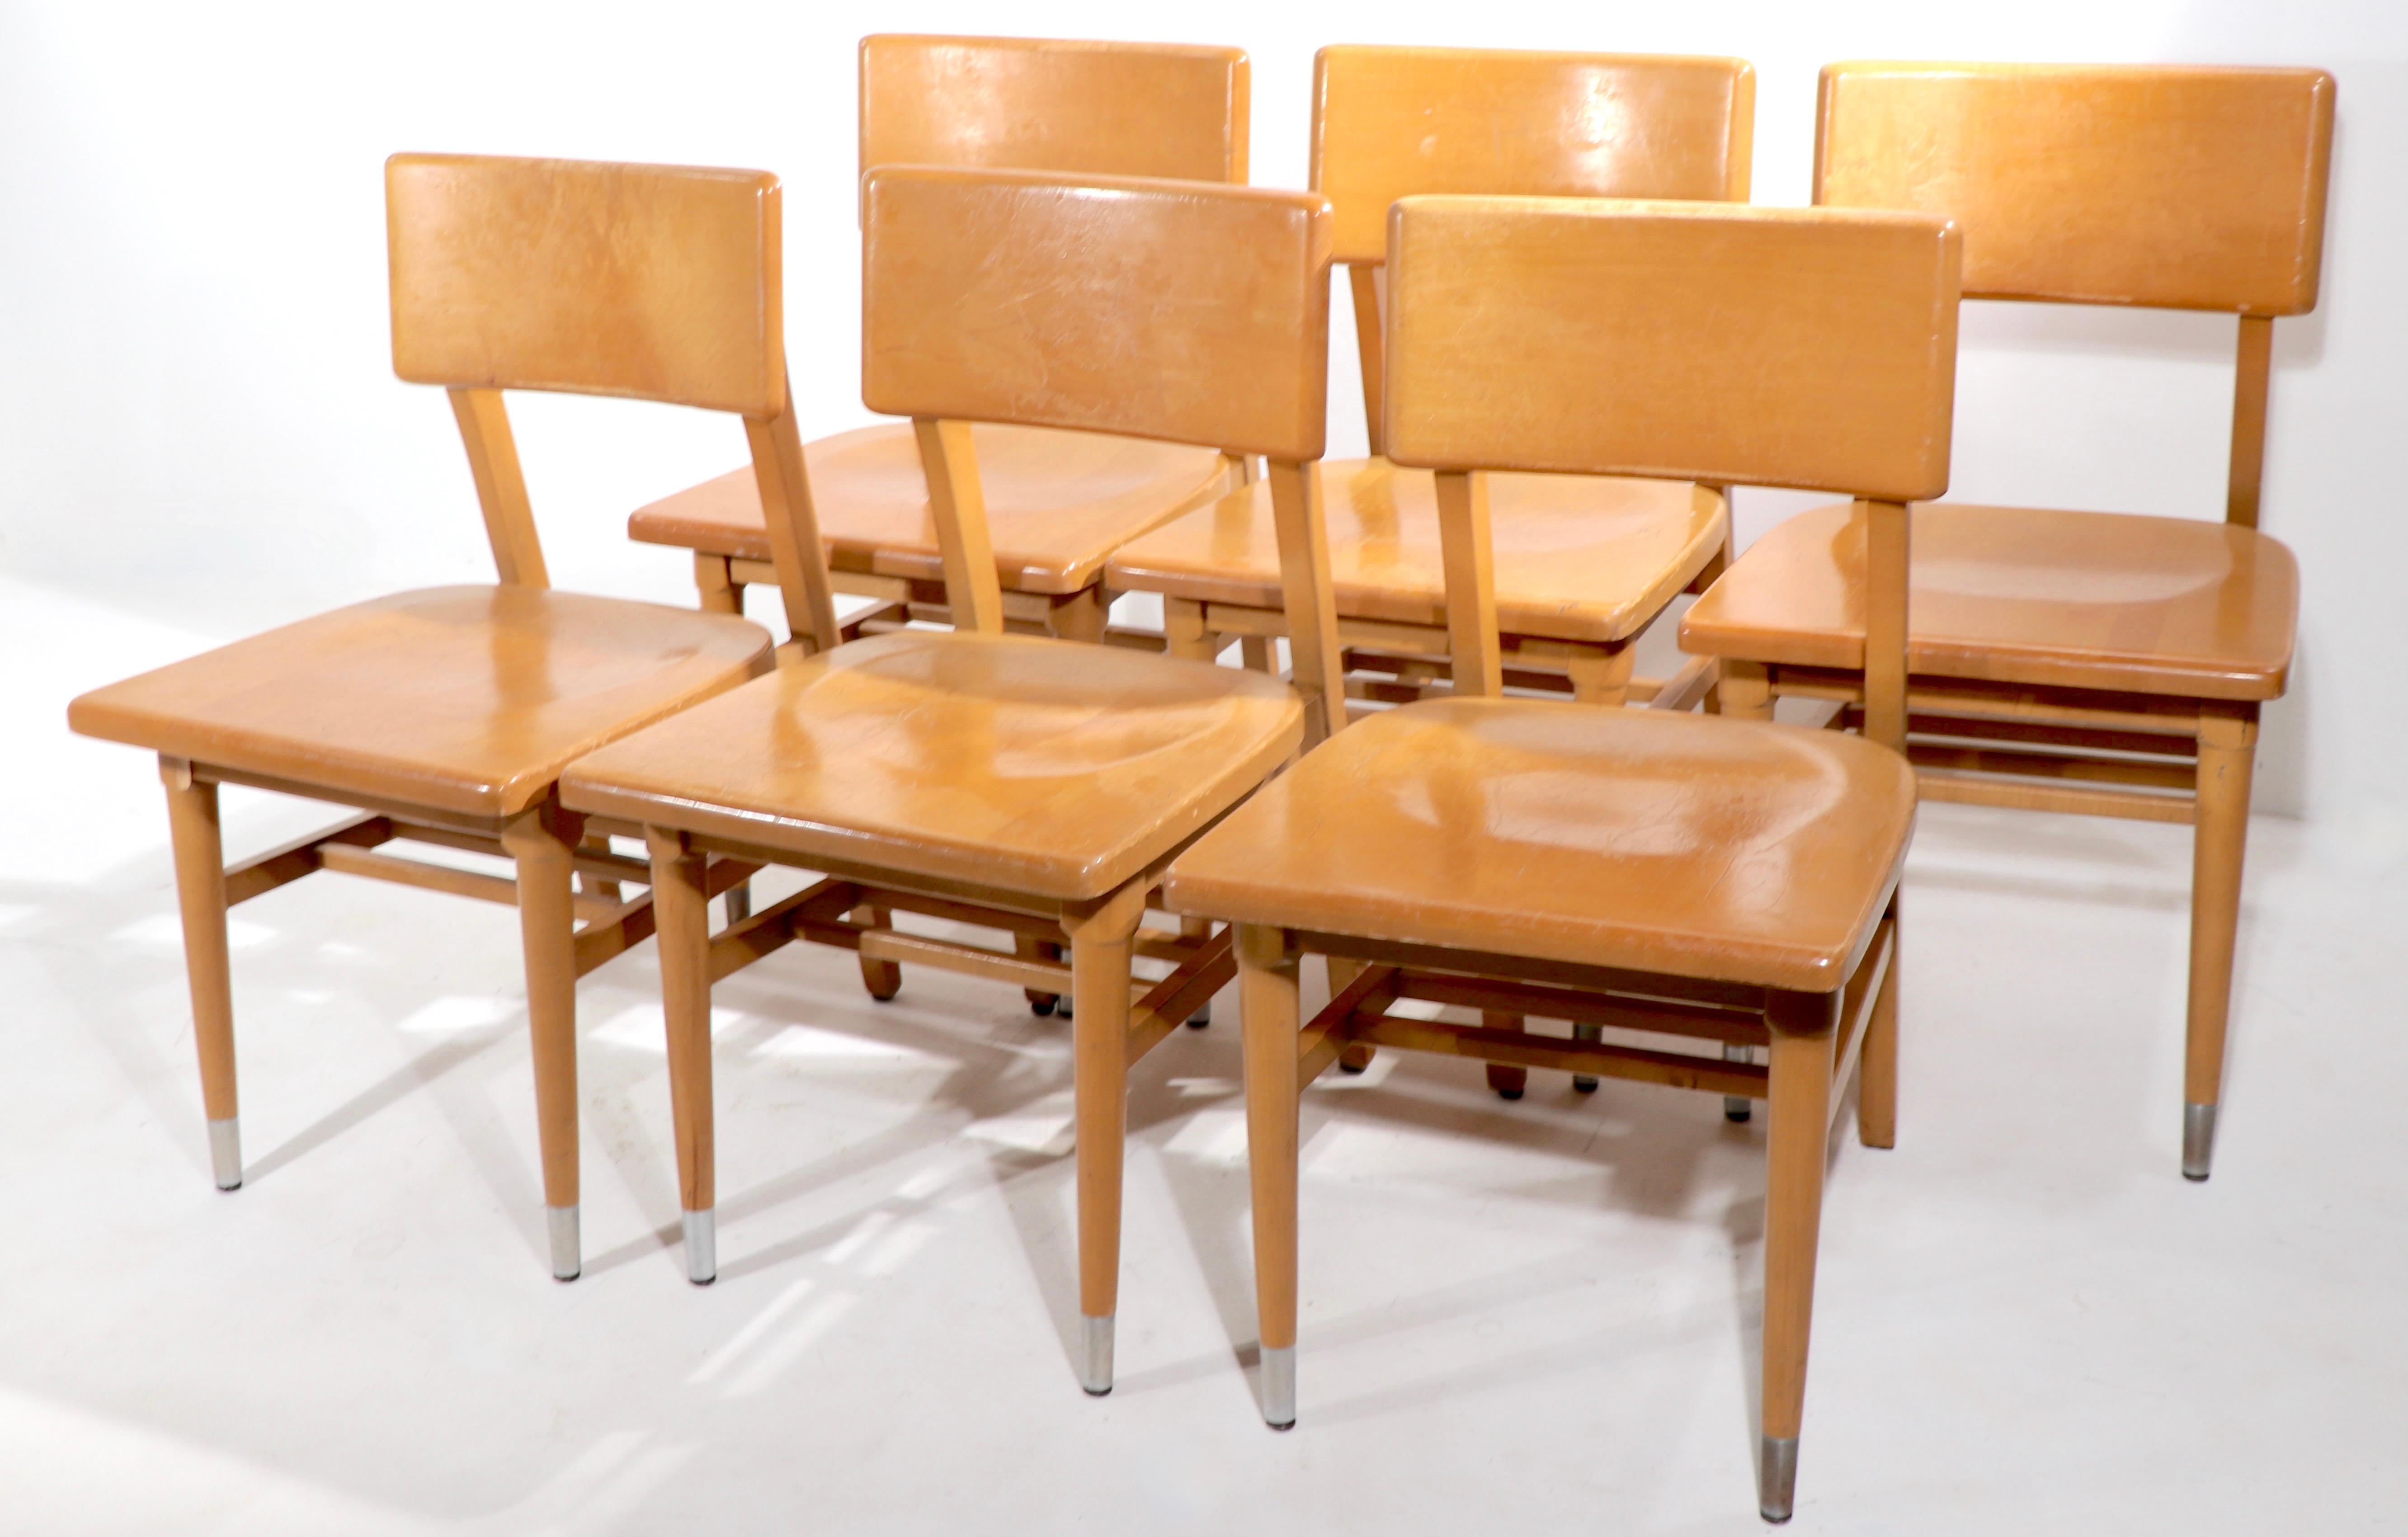 Large Group 50 Pc. Mid Century Cafe Dining Chairs After McCobb 1